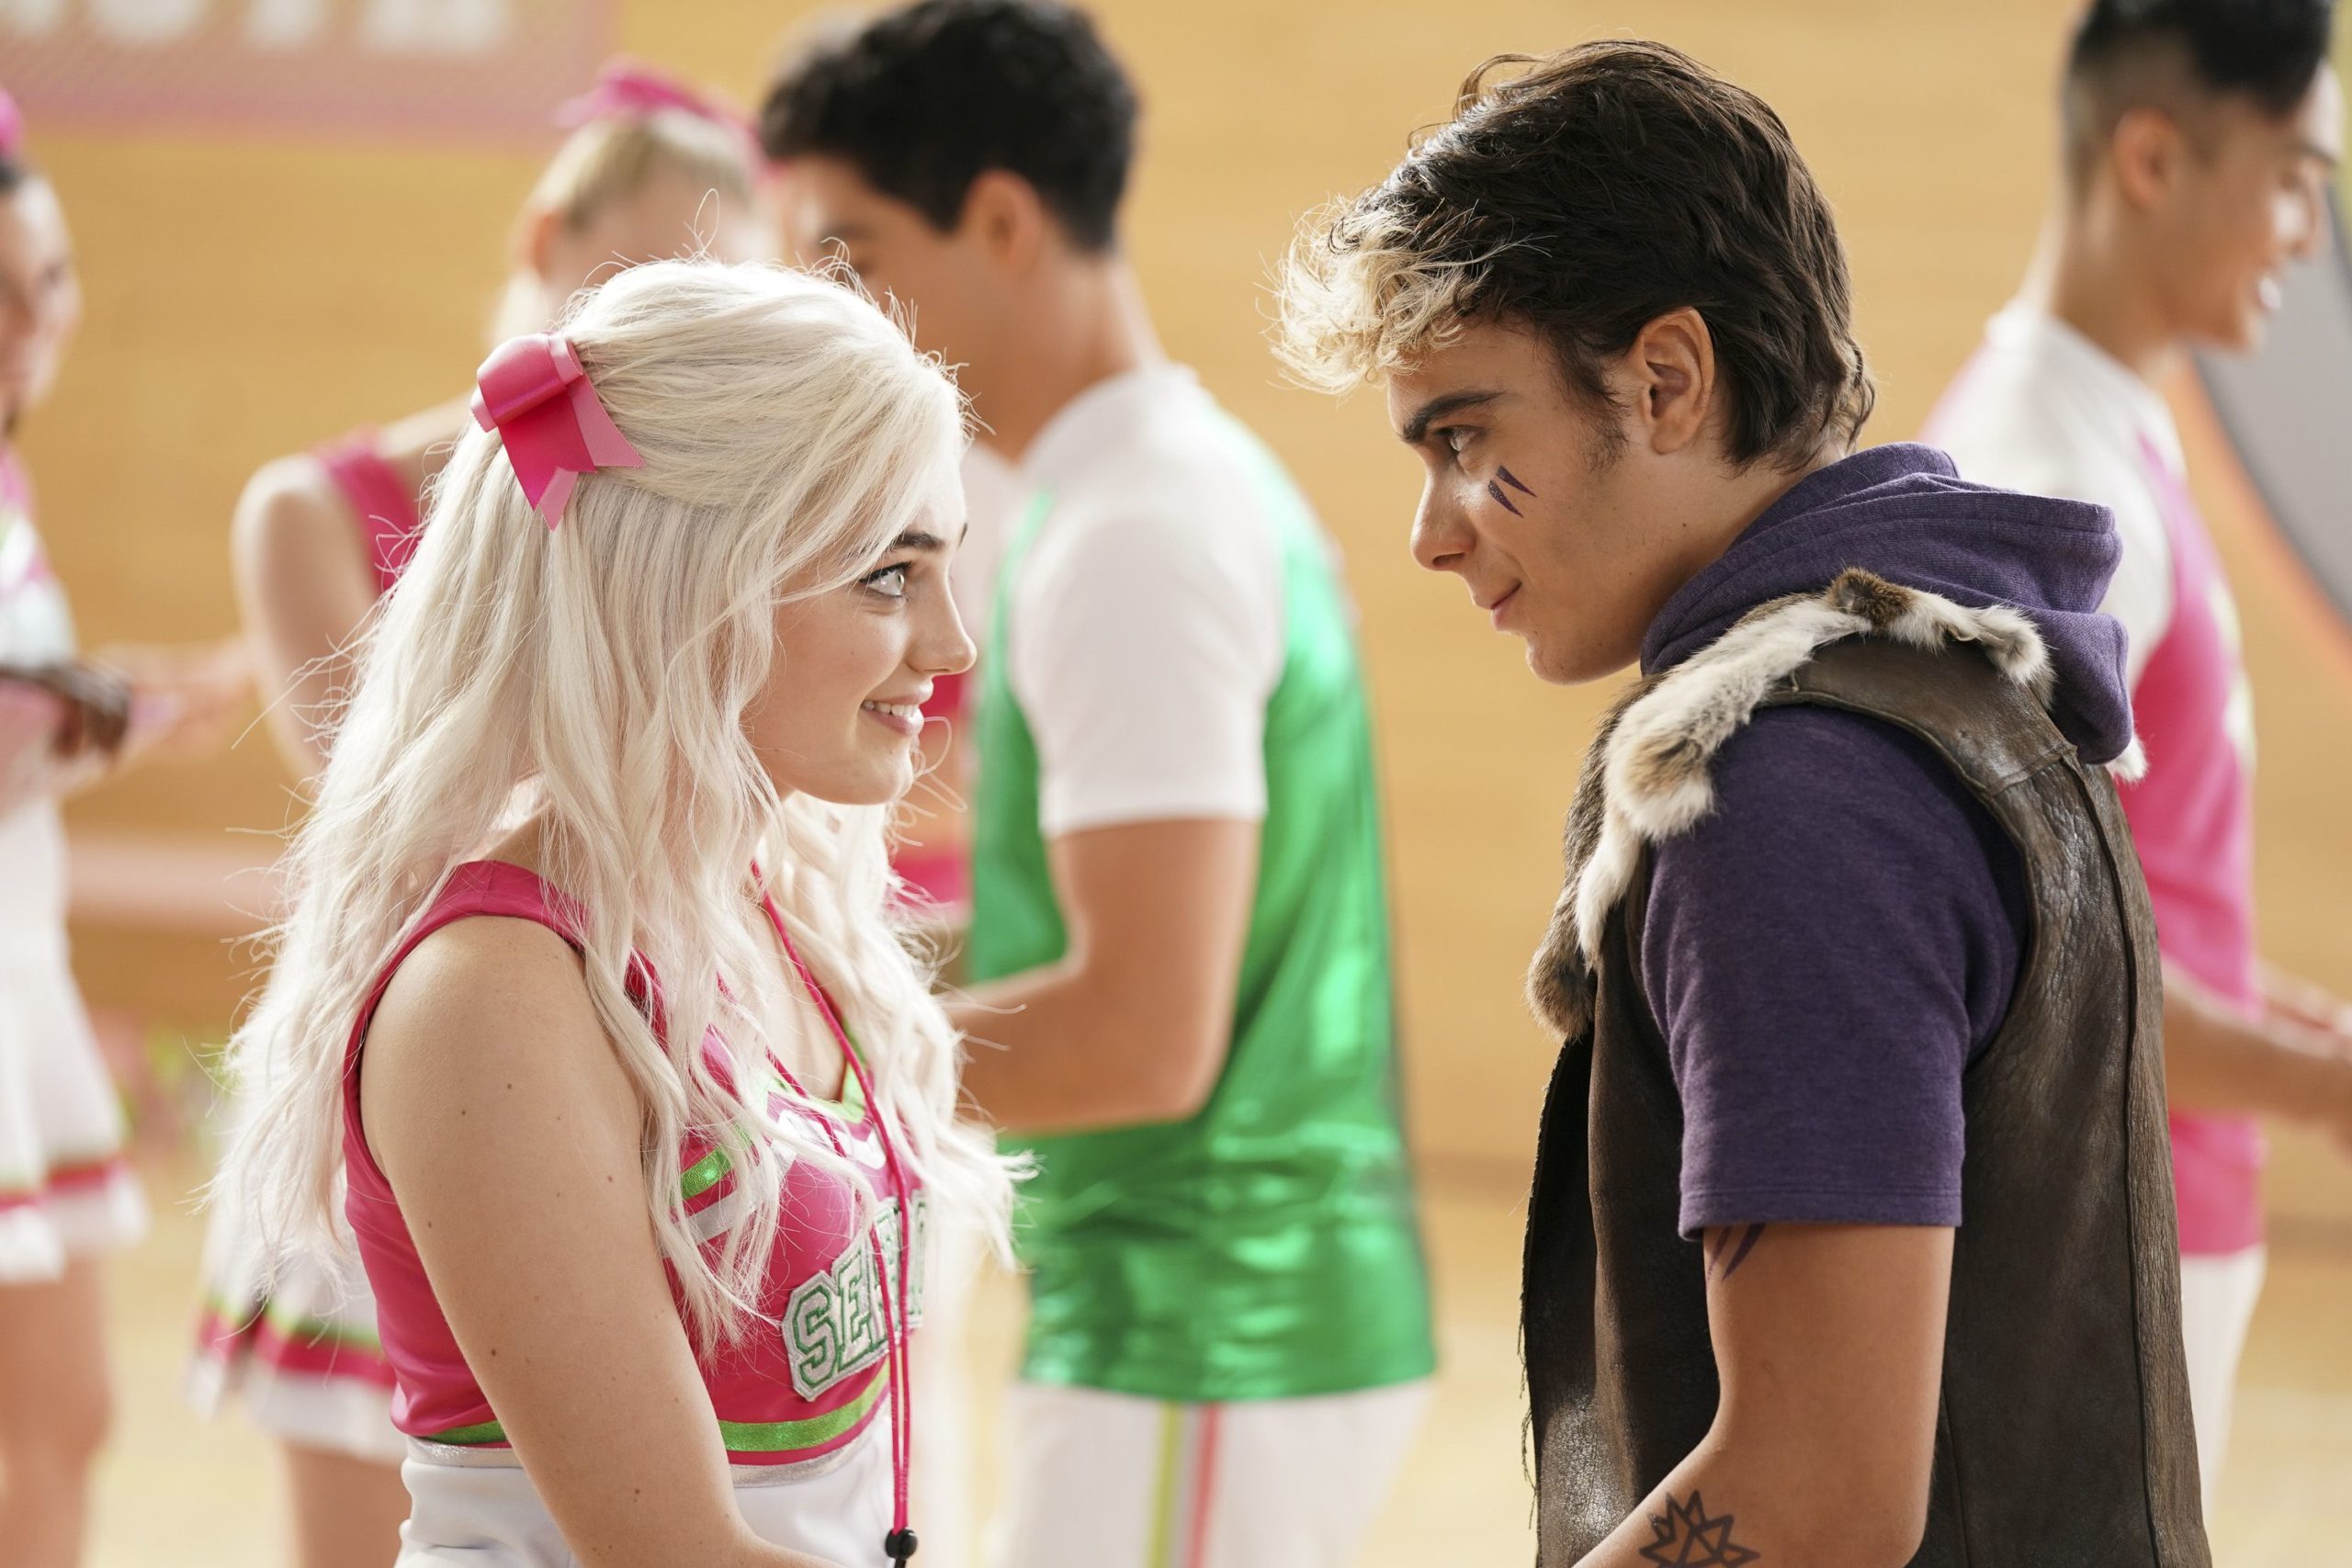 Disney Channel's 'Zombies' arrives with hope that zombies and